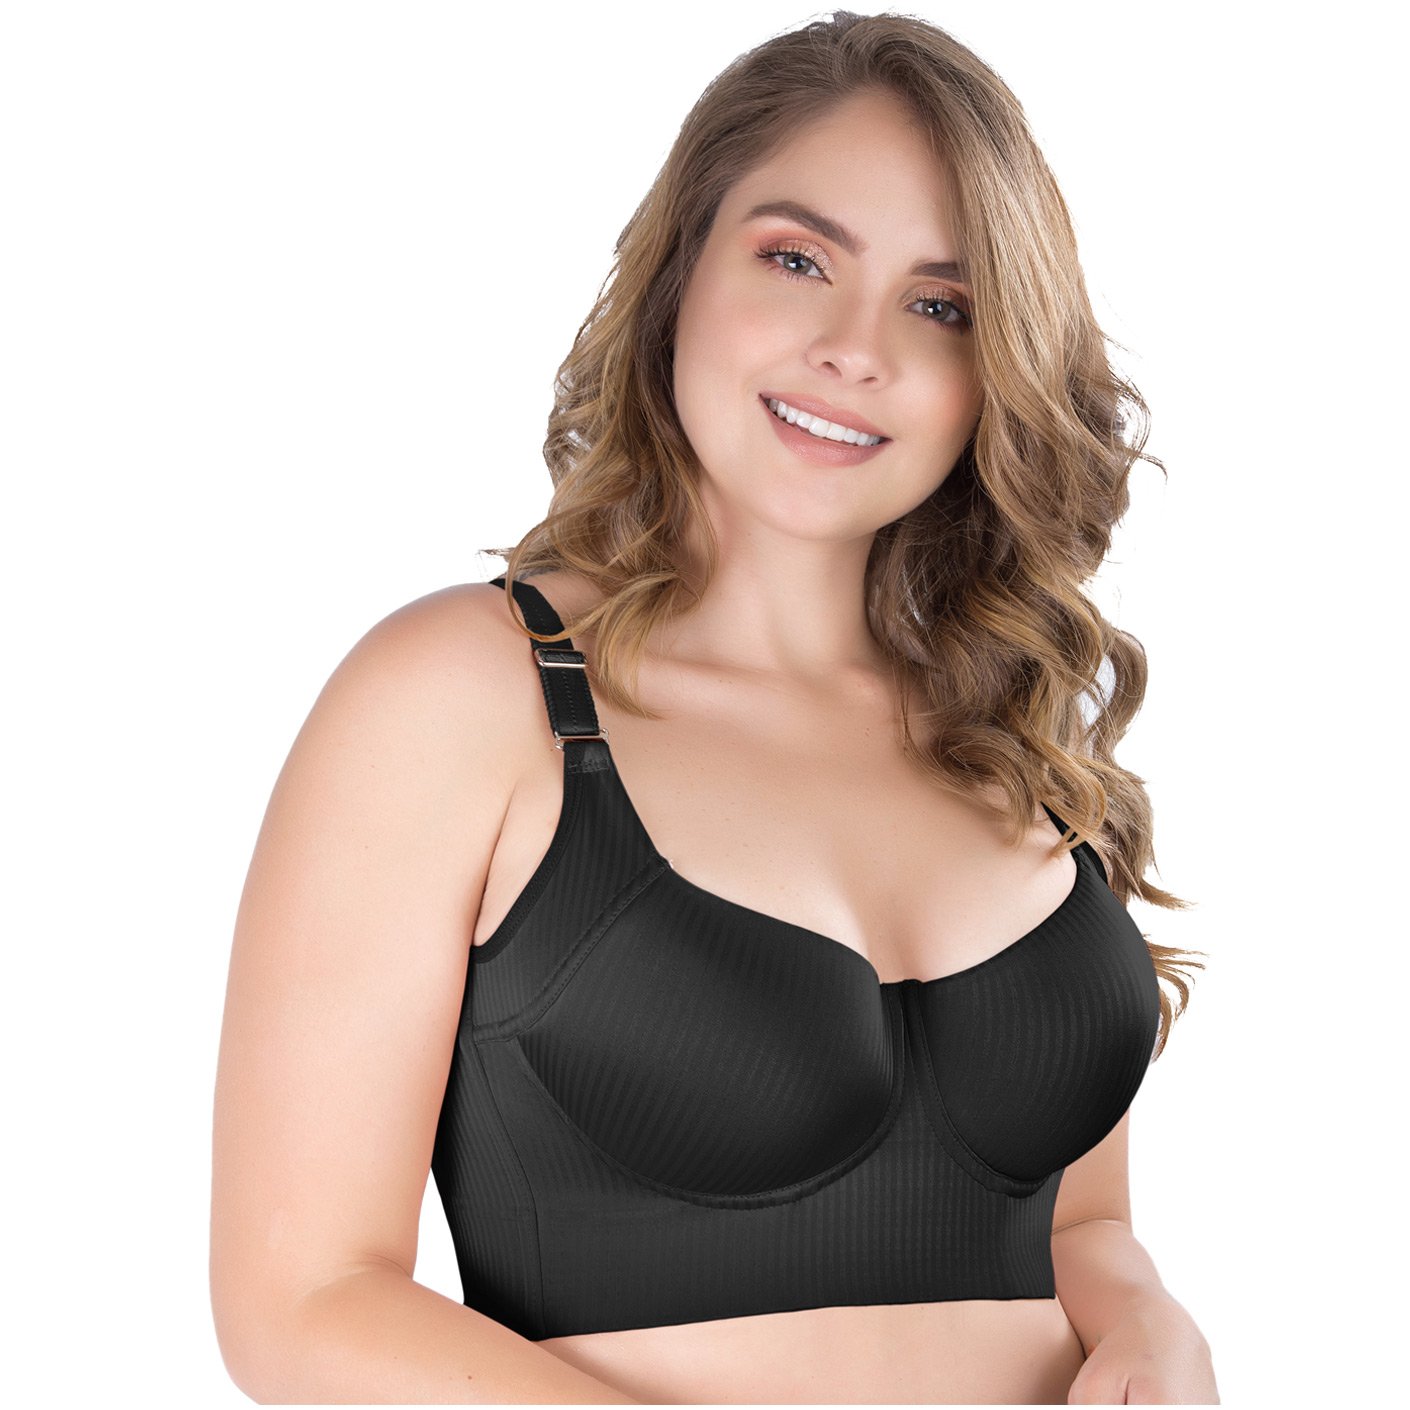 UPLADY 8542 / EXTRA FIRM CONTROL FULL CUP BRA WITH SIDE SUPPORT